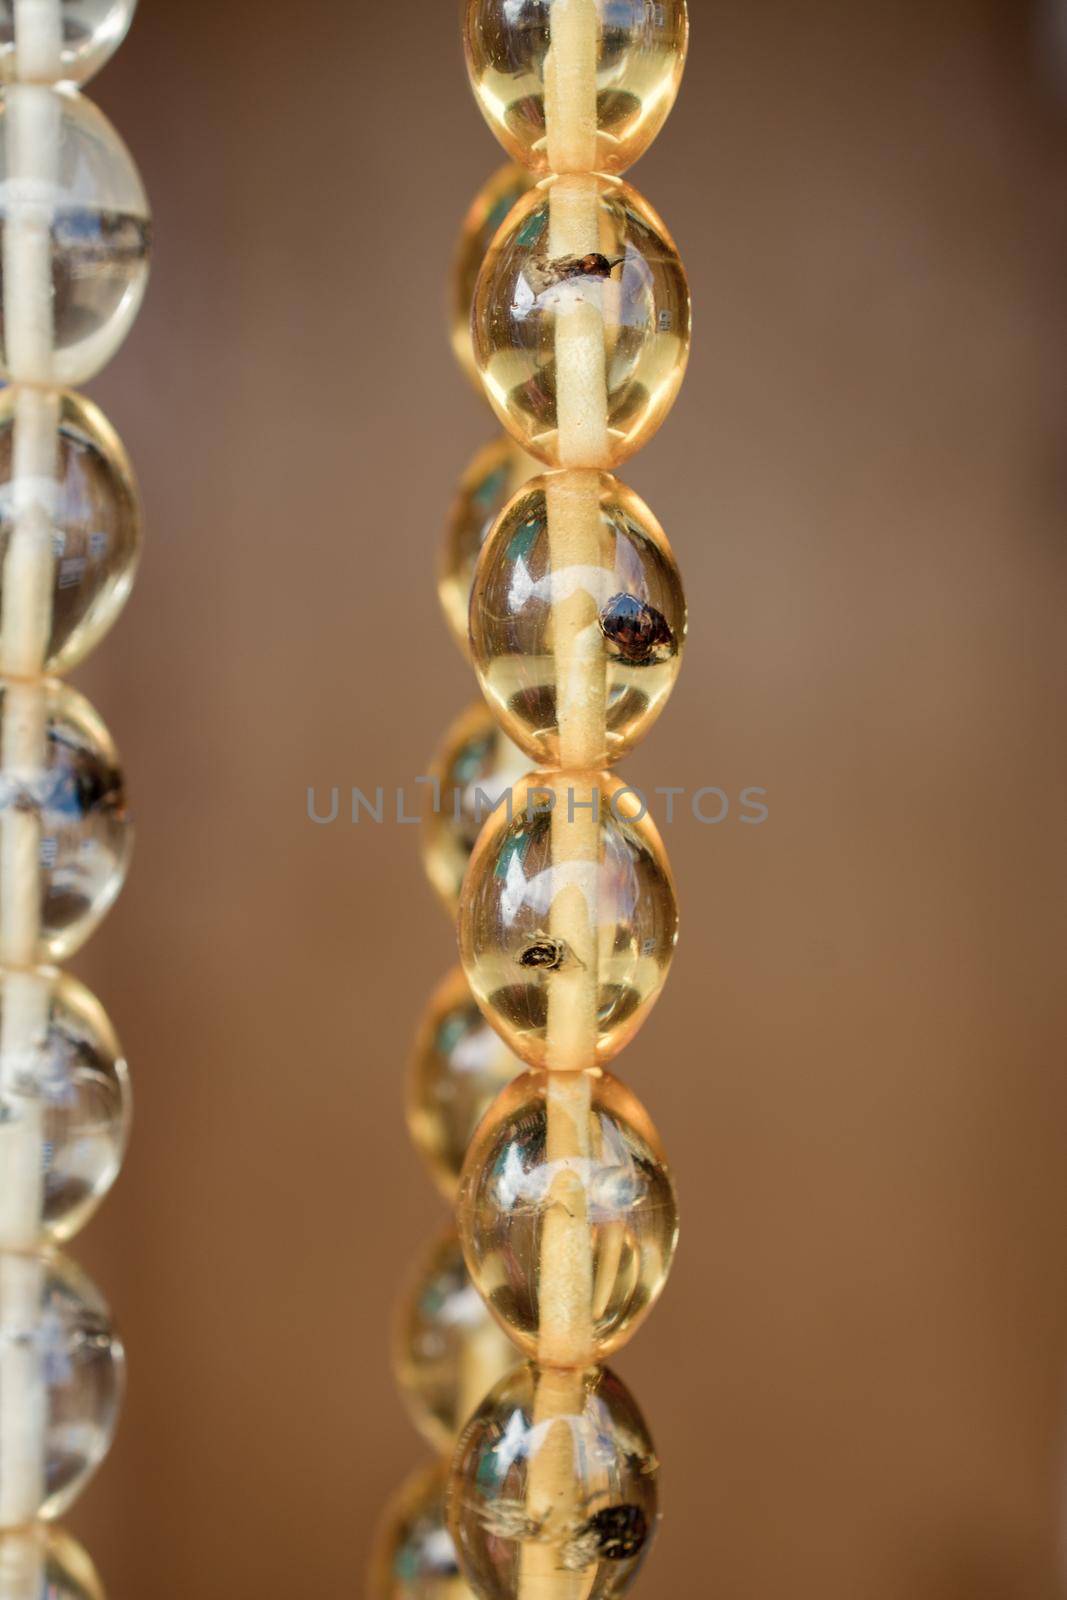  Beads of the same type and color by berkay